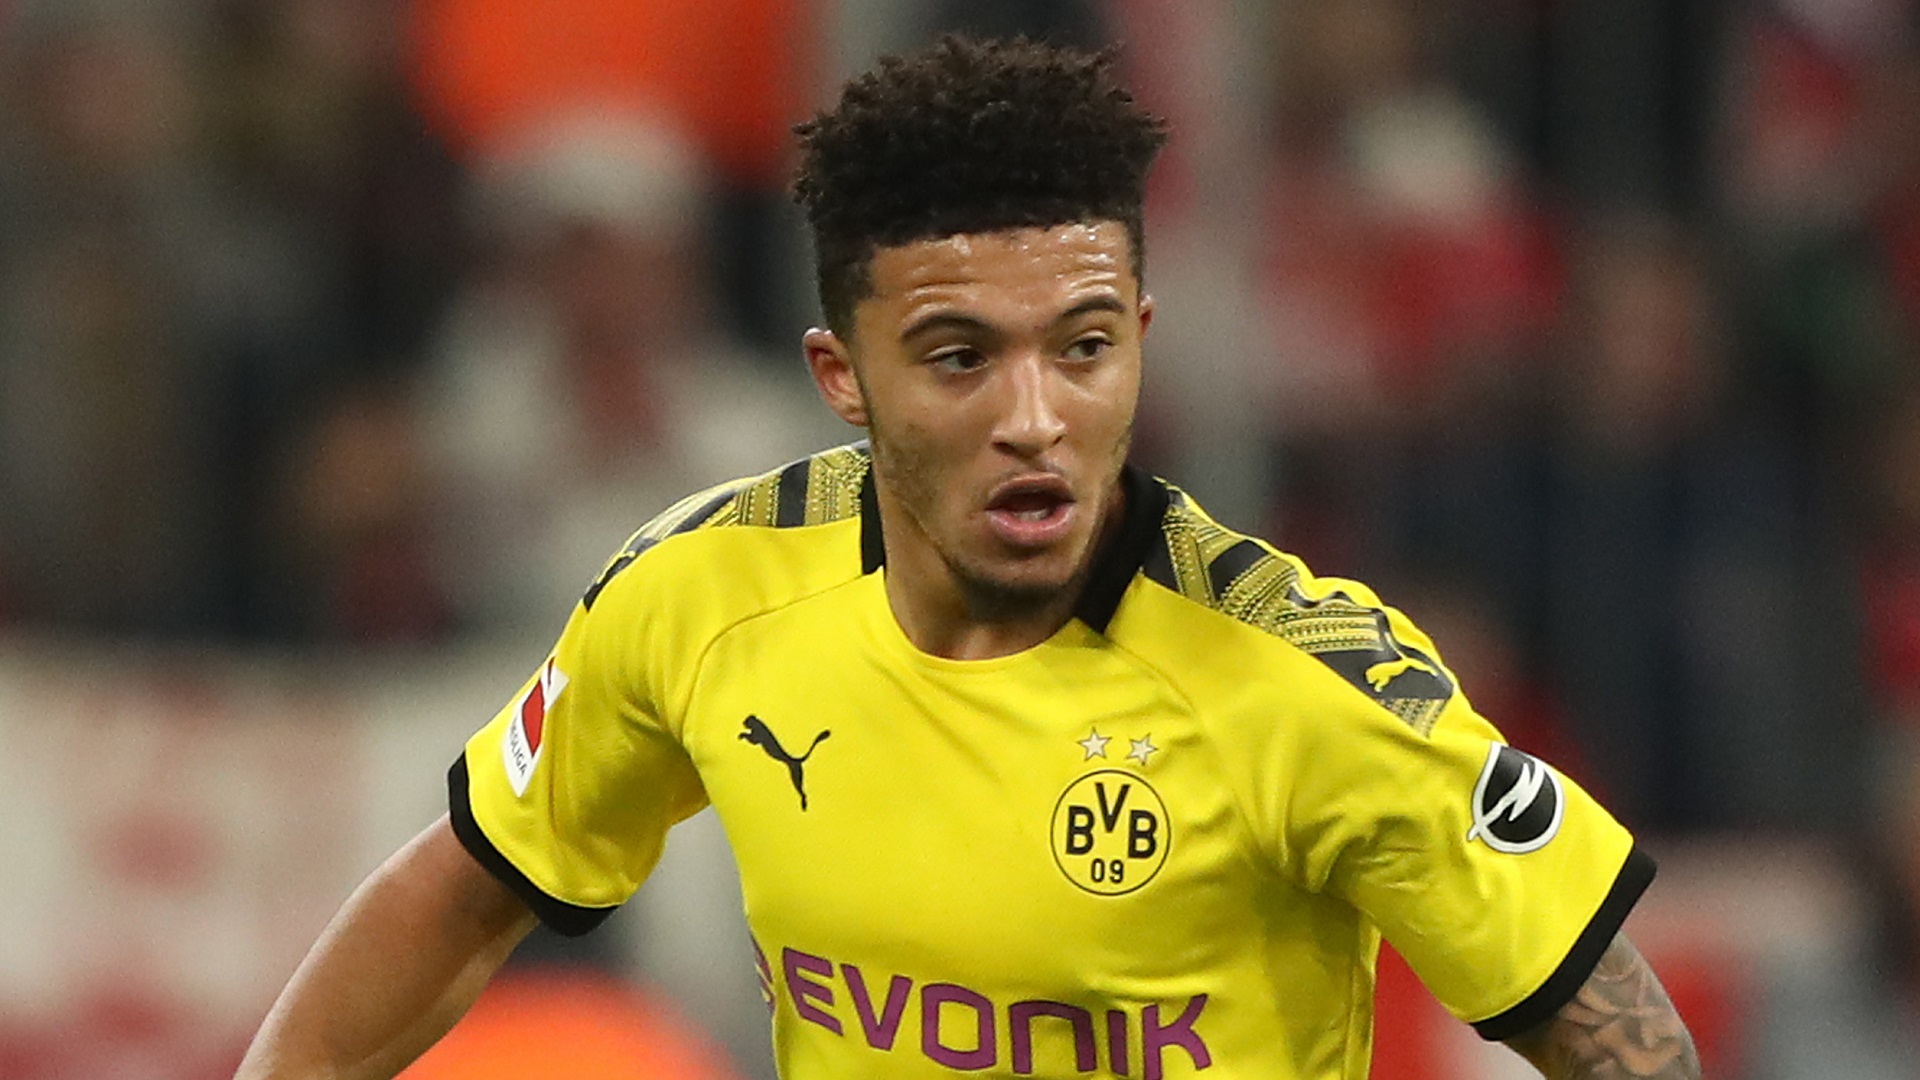 De Bruyne rates 'crazy' Sancho as he recalls training at Man City with the Man Utd target